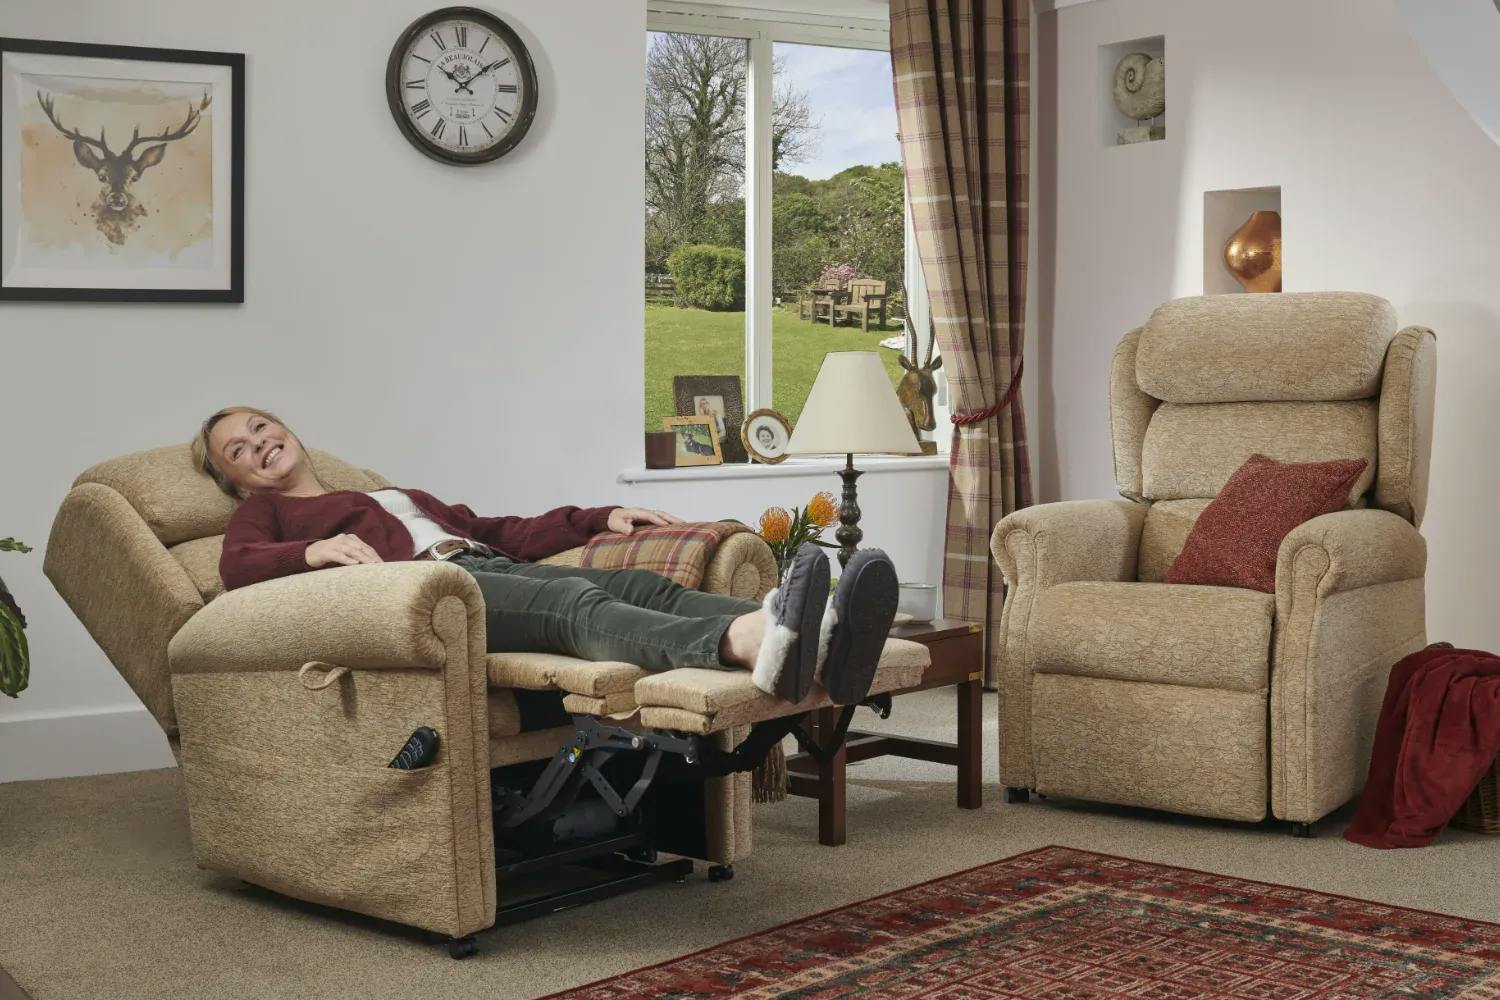 Woman in living room using a Oak Tree rise and recliner with unique high leg lift